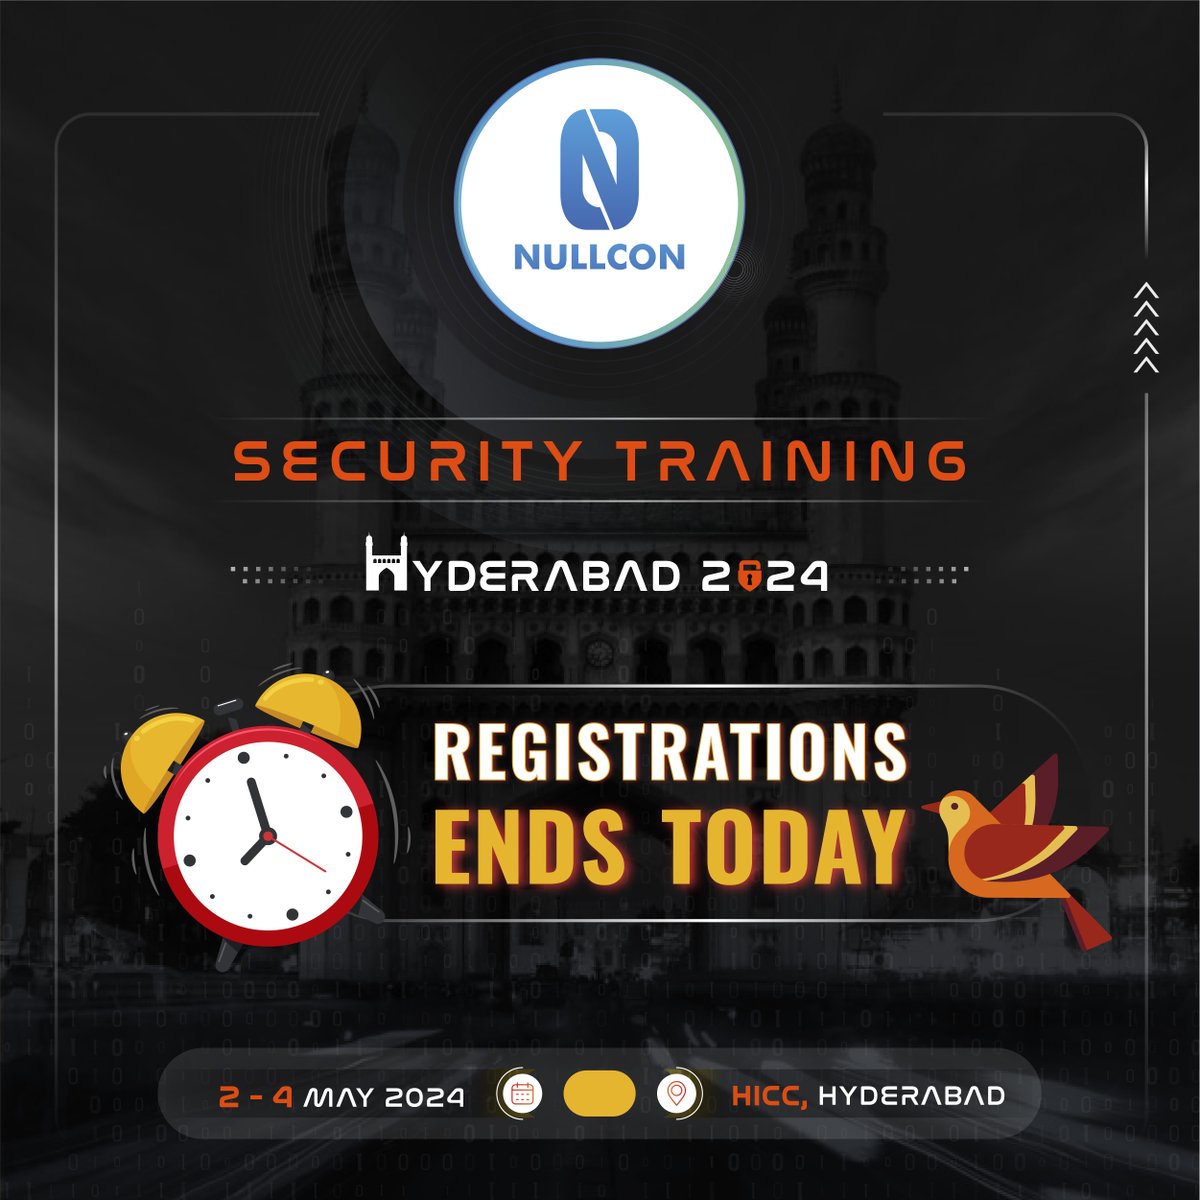 ⌛ The countdown is on! Registration for #NullconHYD ends today ⌛

Hurry and join us for incredible hands-on training sessions. Register Now: nullcon.net/hyderabad-2024…

#training #cybersecurity #ethicalhacking